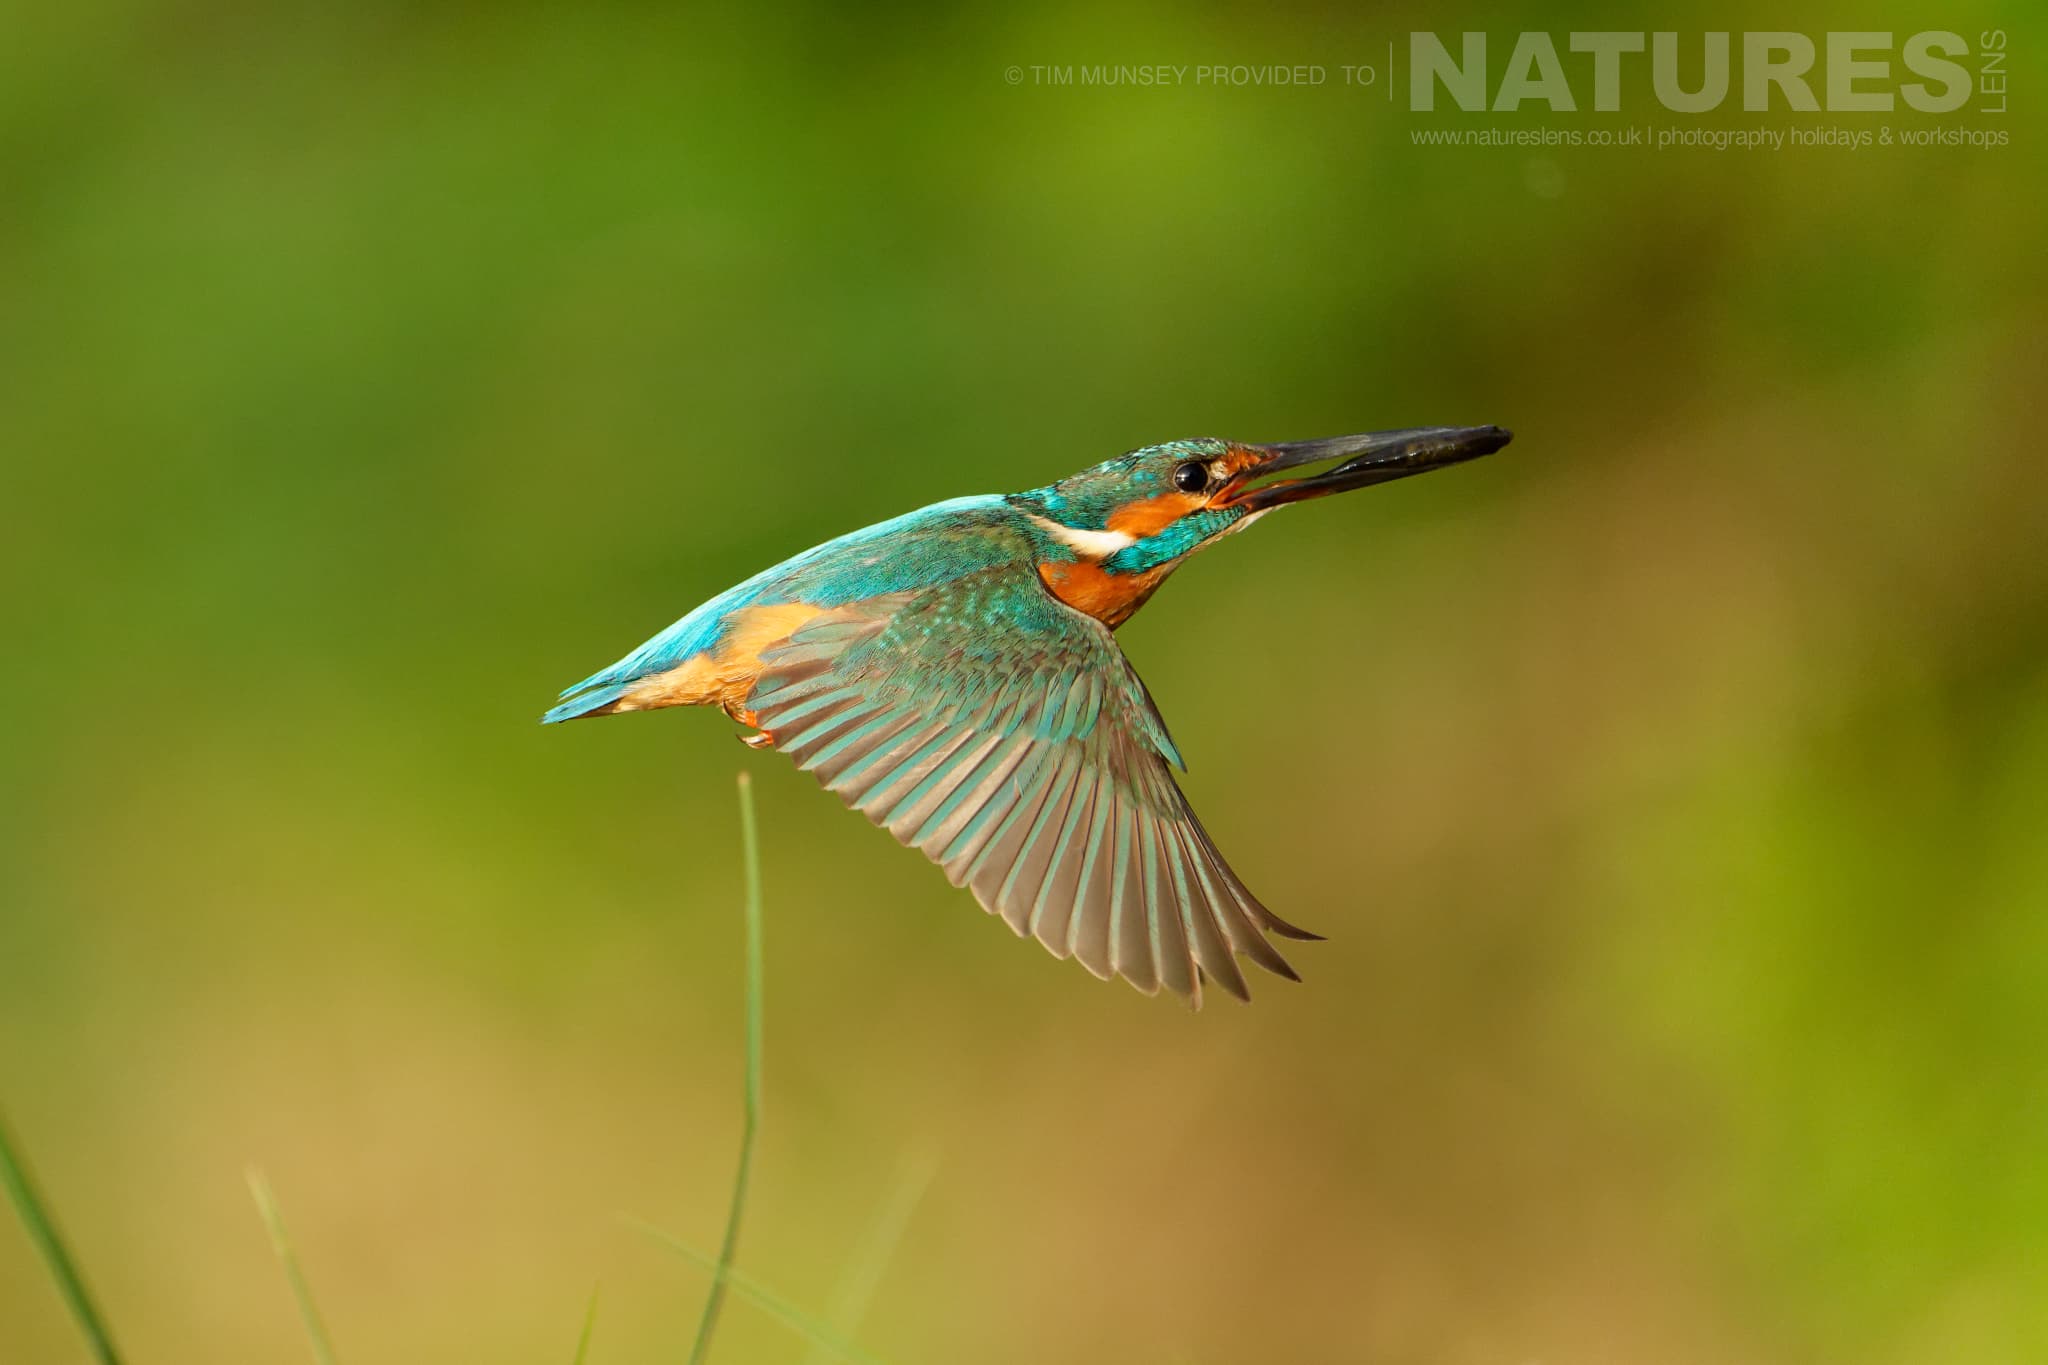 A Common Kingfisher In Flight One Of The Species That Features On The Natureslens Birds Of The Danube Delta Photography Holiday